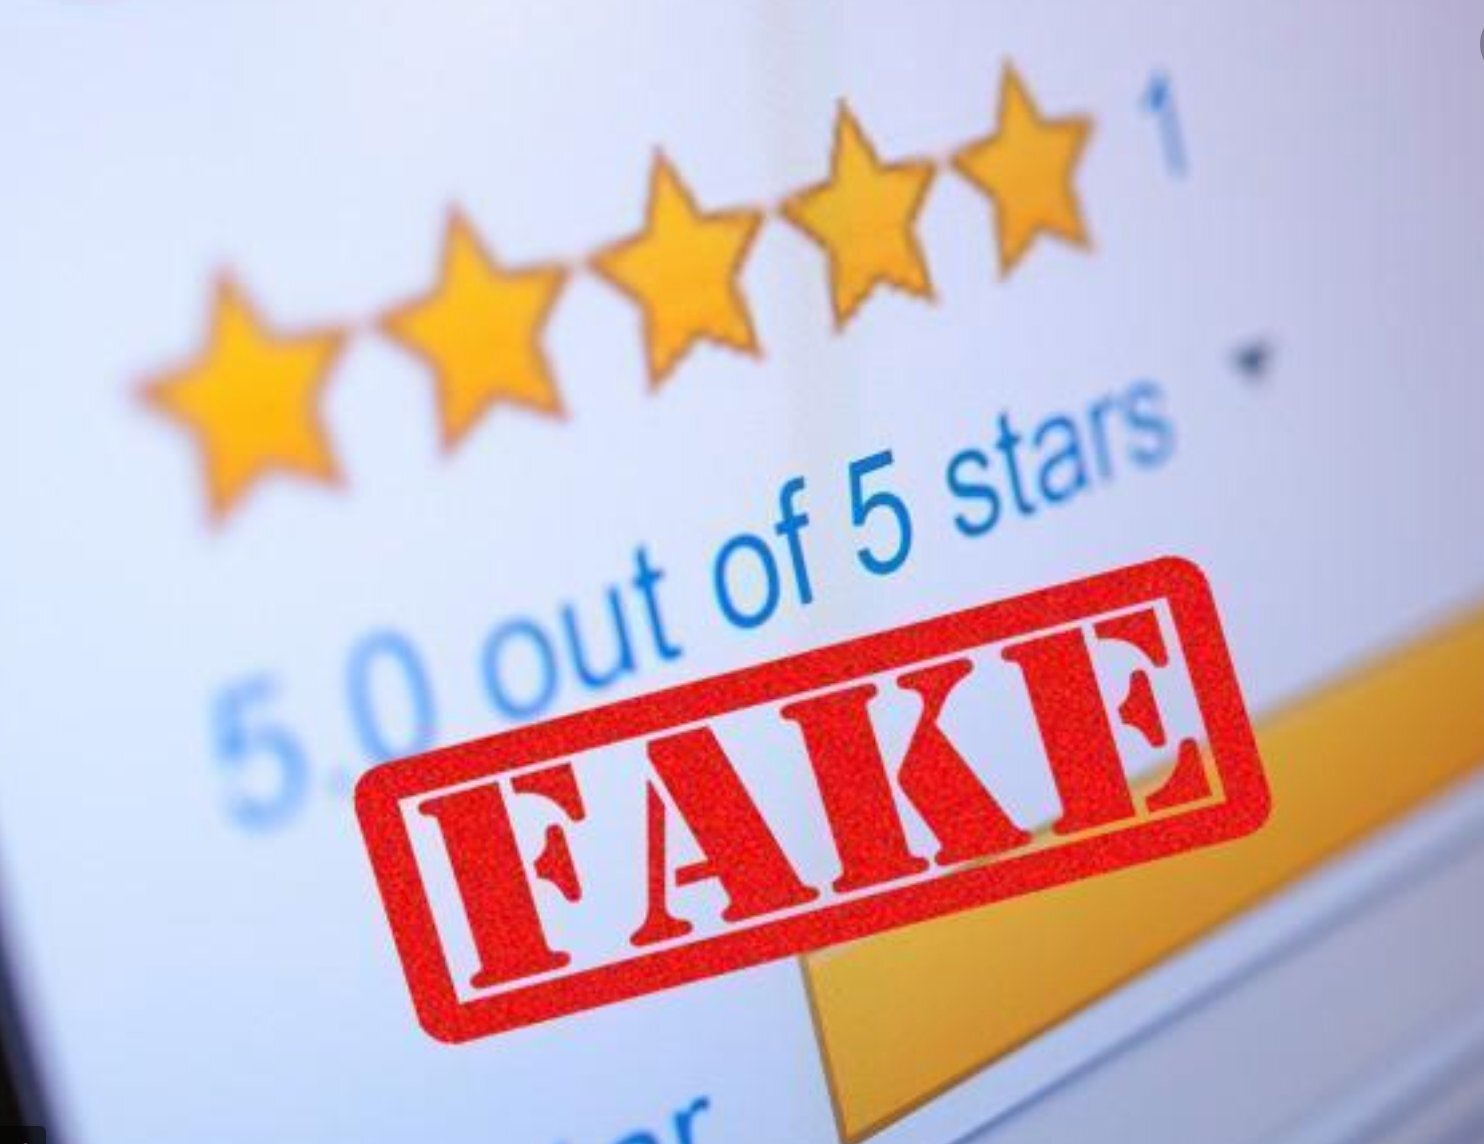 How to remove counterfeits from DHgate - Red Points